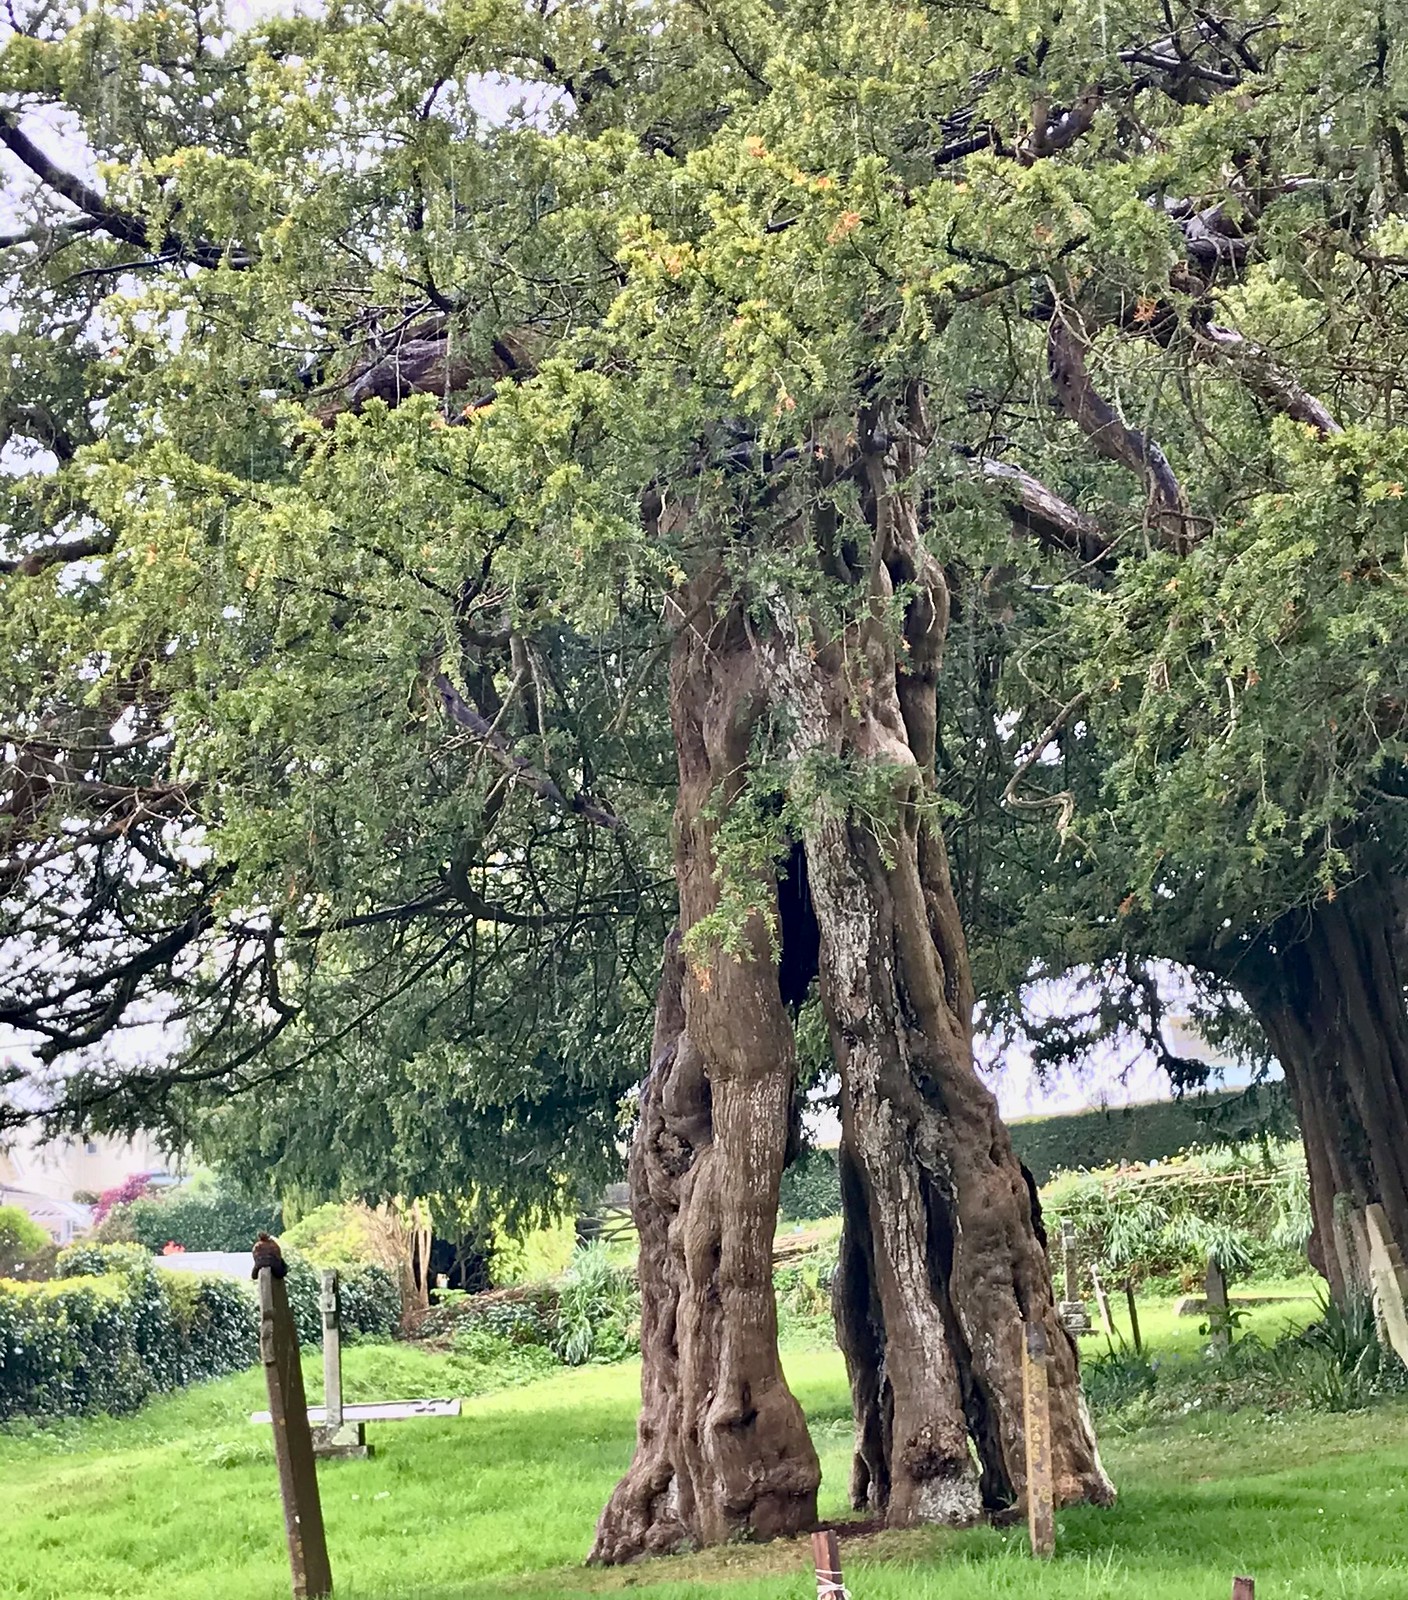 The 800 year old Yew tree in Holne churchyard